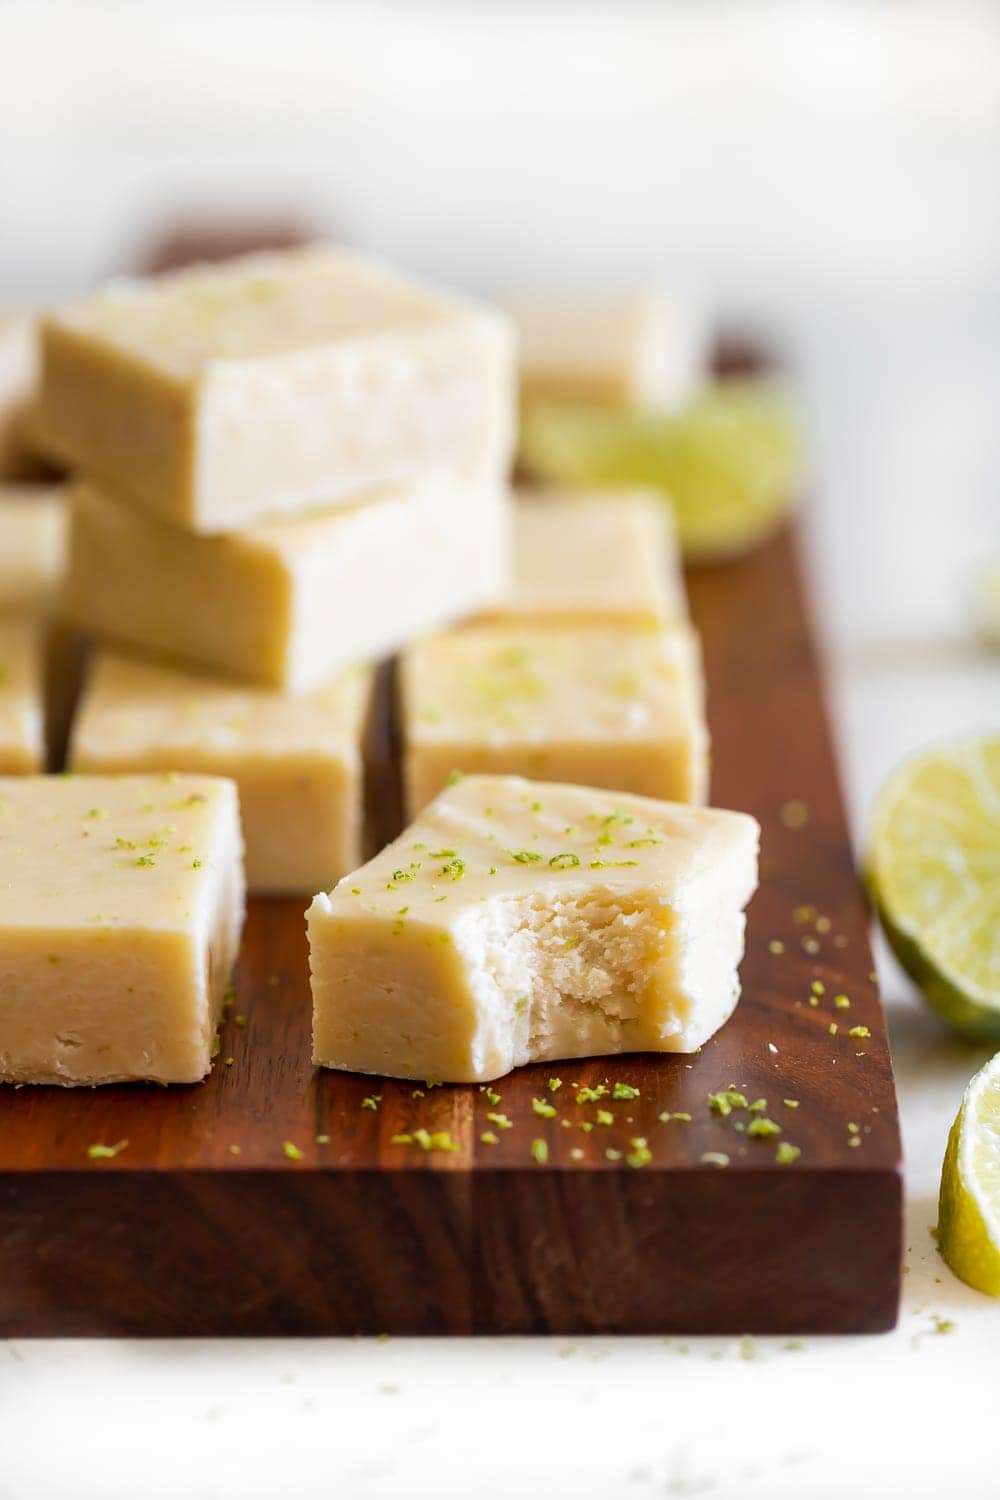 white chocolate key lime fudge with a bite mark on a wood cutting board